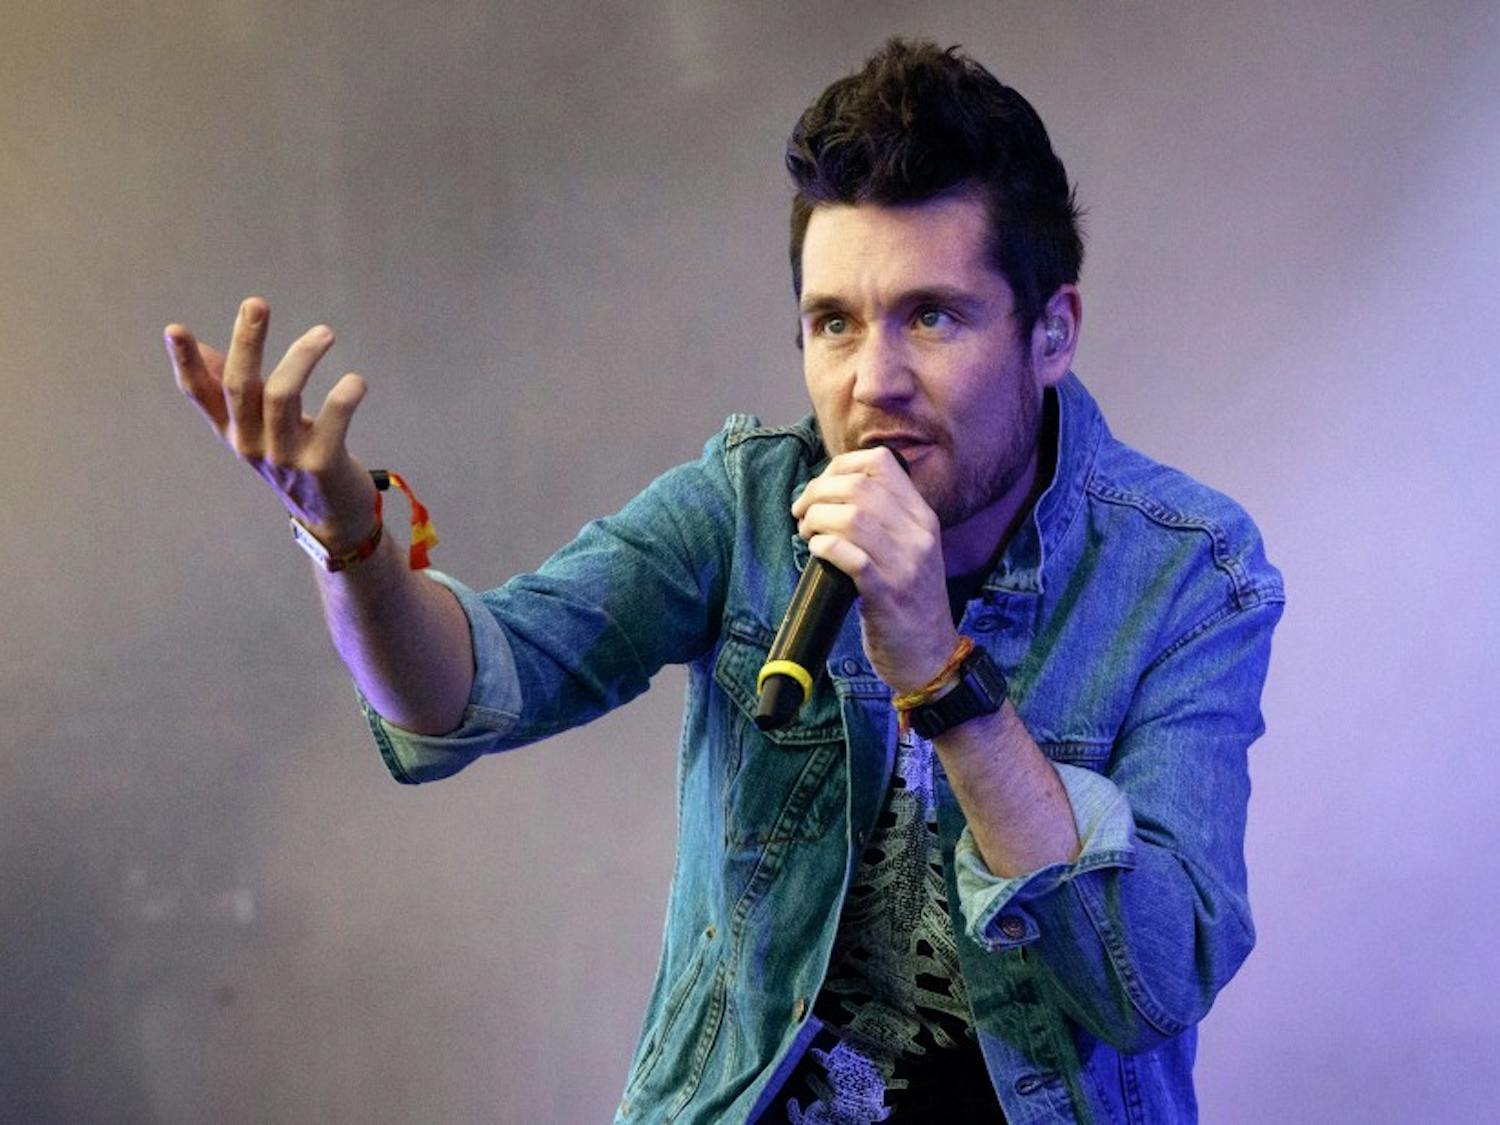 Frontman Dan Smith (above) has pitched his band’s third album as somewhat of a concept album.